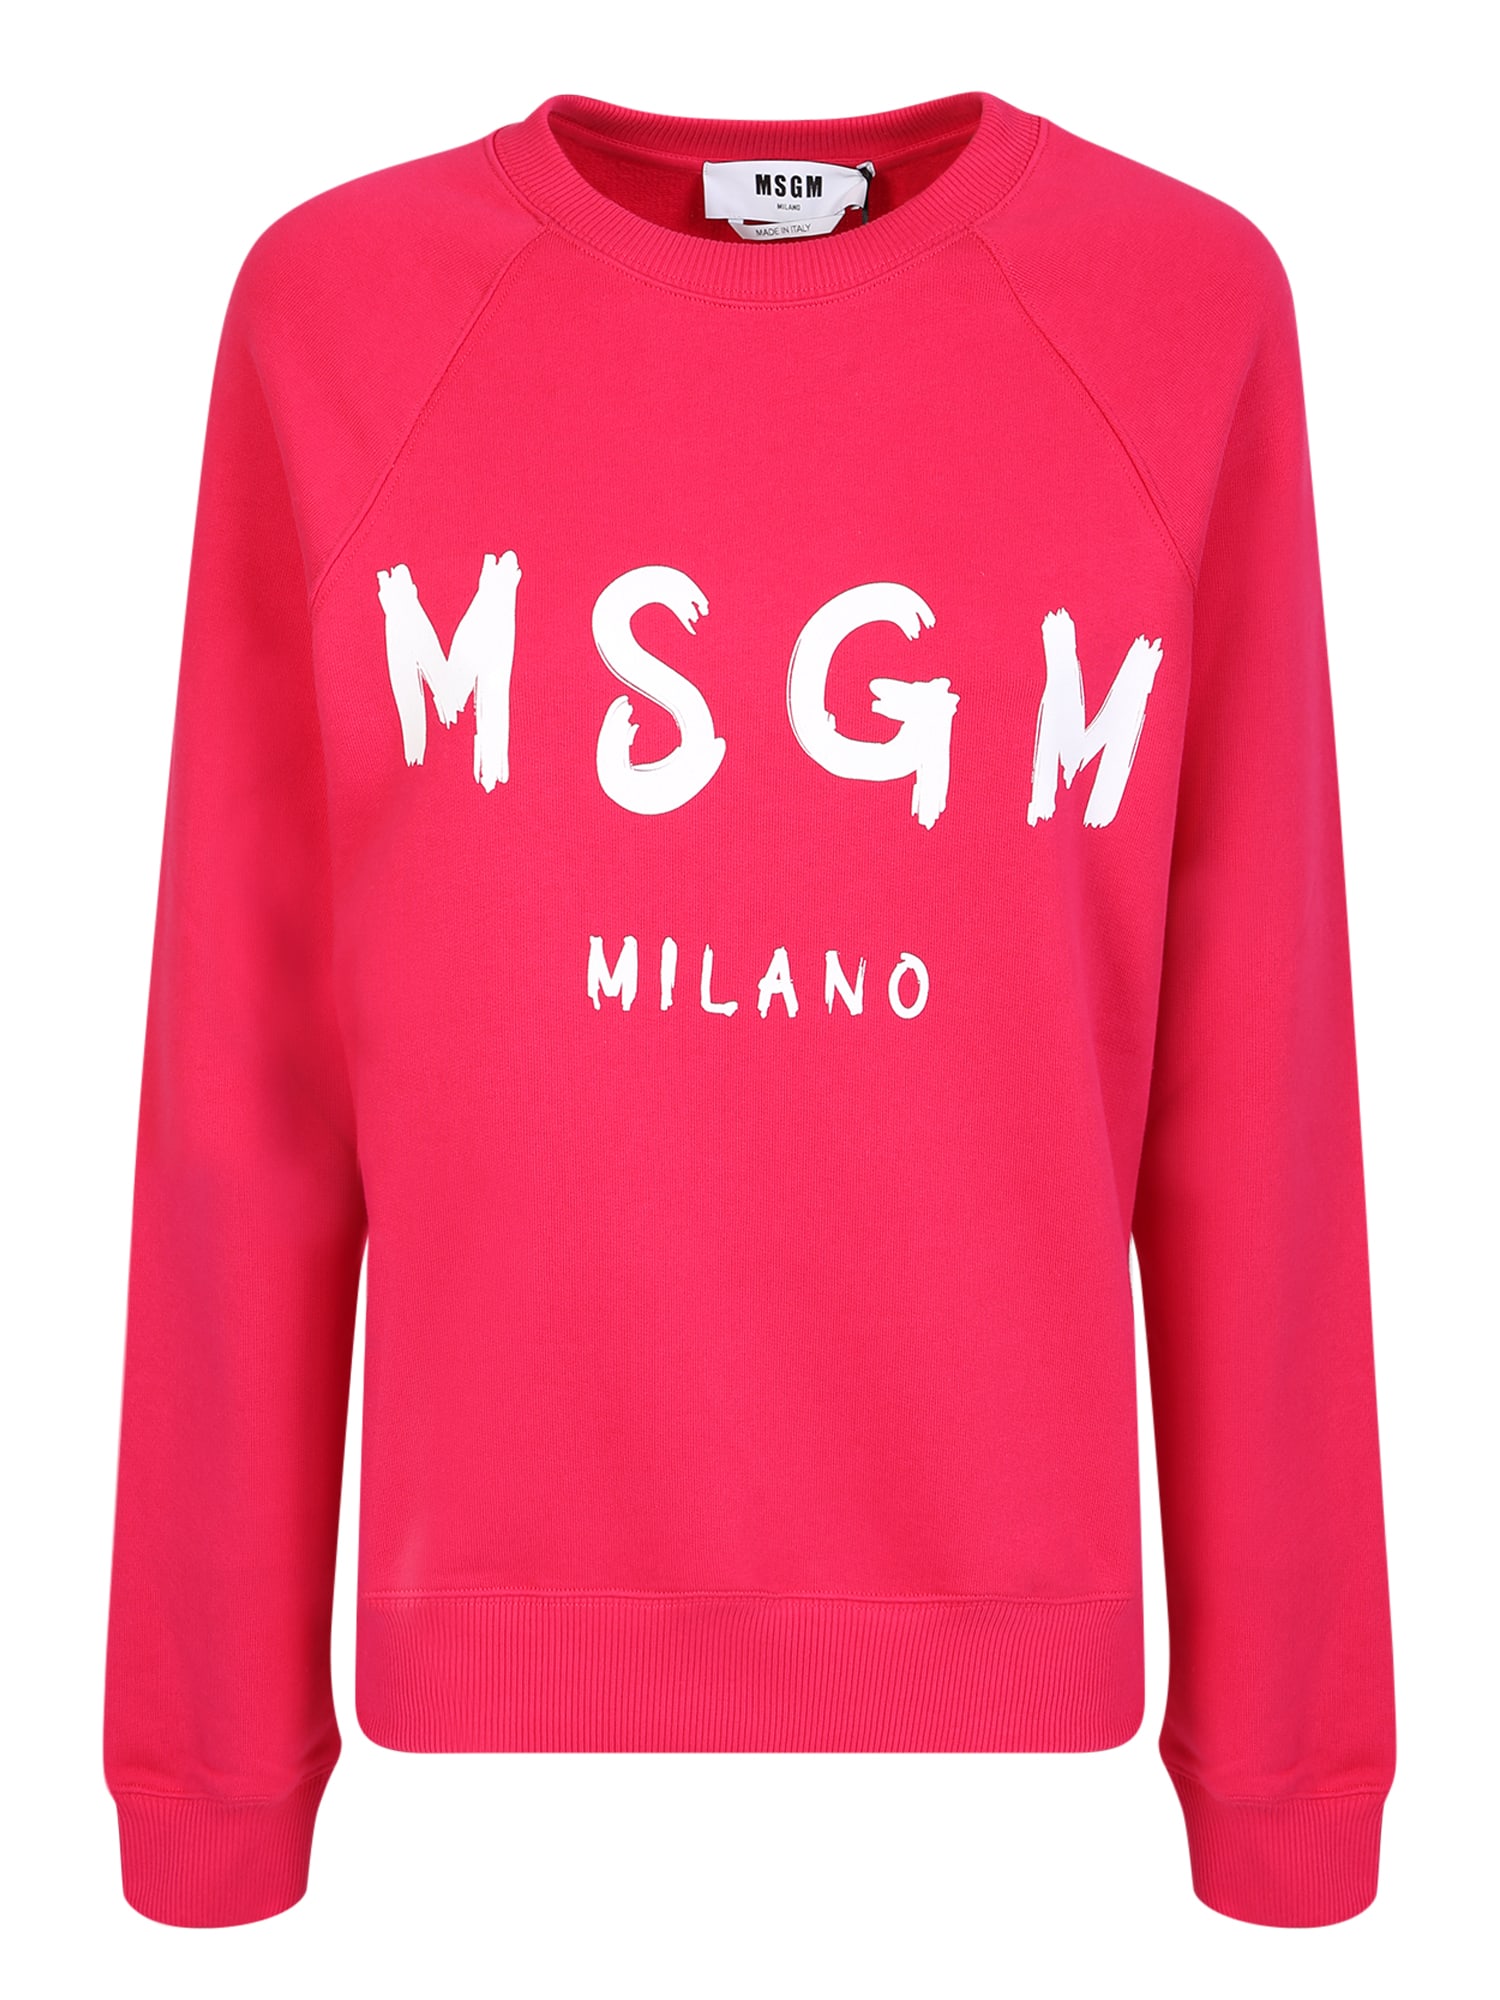 Sweatshirt With Iconic Logo. Minimal But Ideal For A Sporty Look MSGM